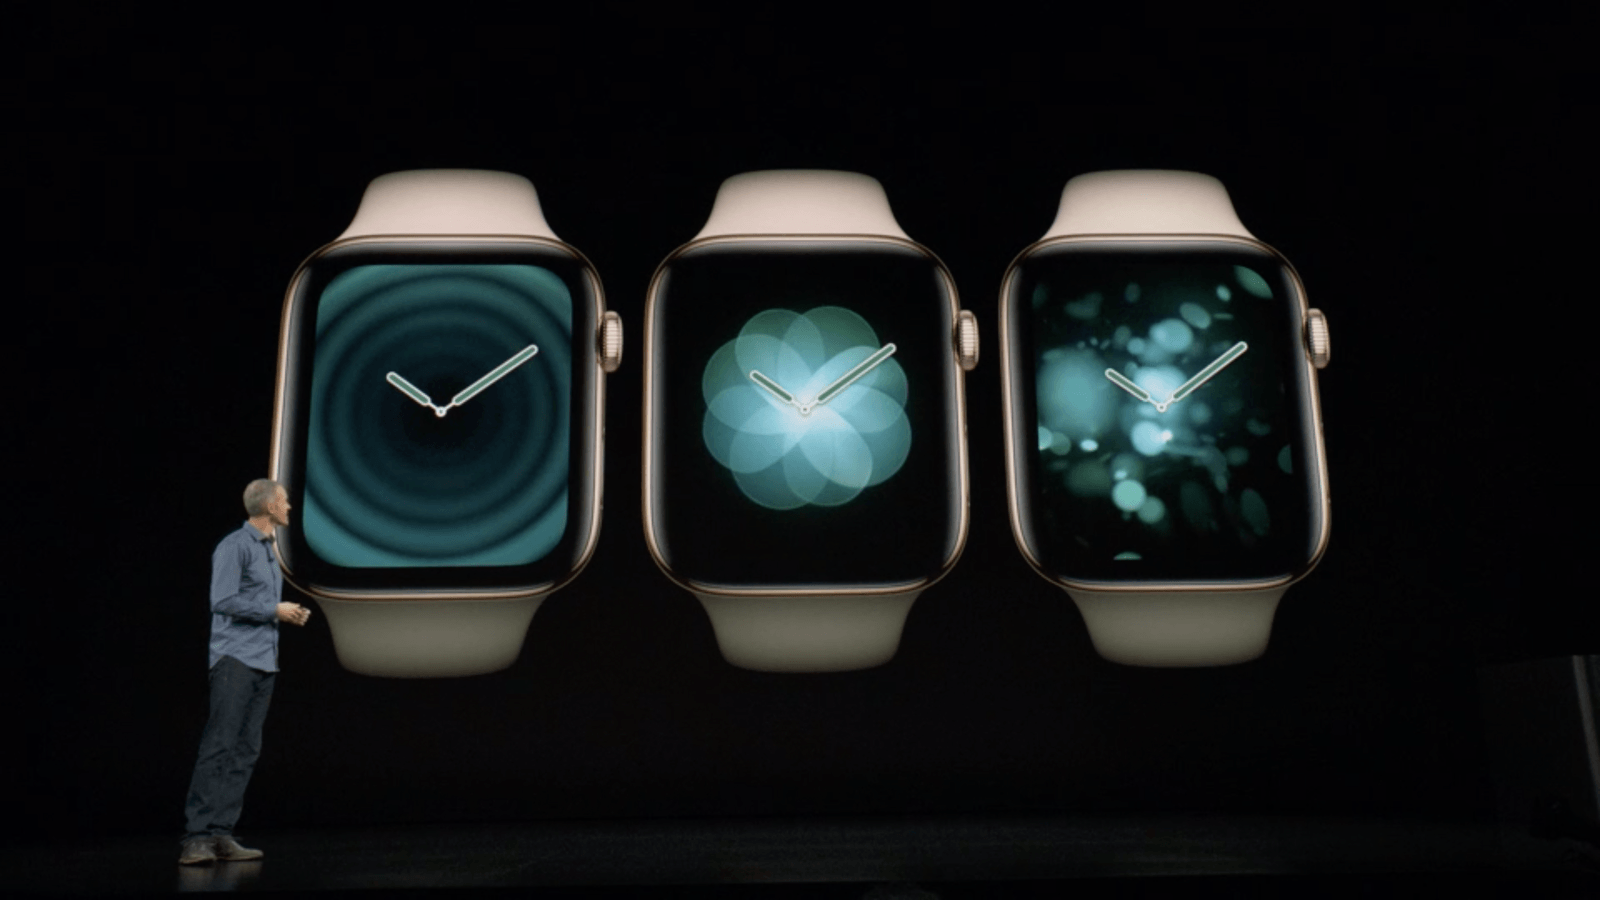 Here are four new watch faces coming to existing Apple Watches with